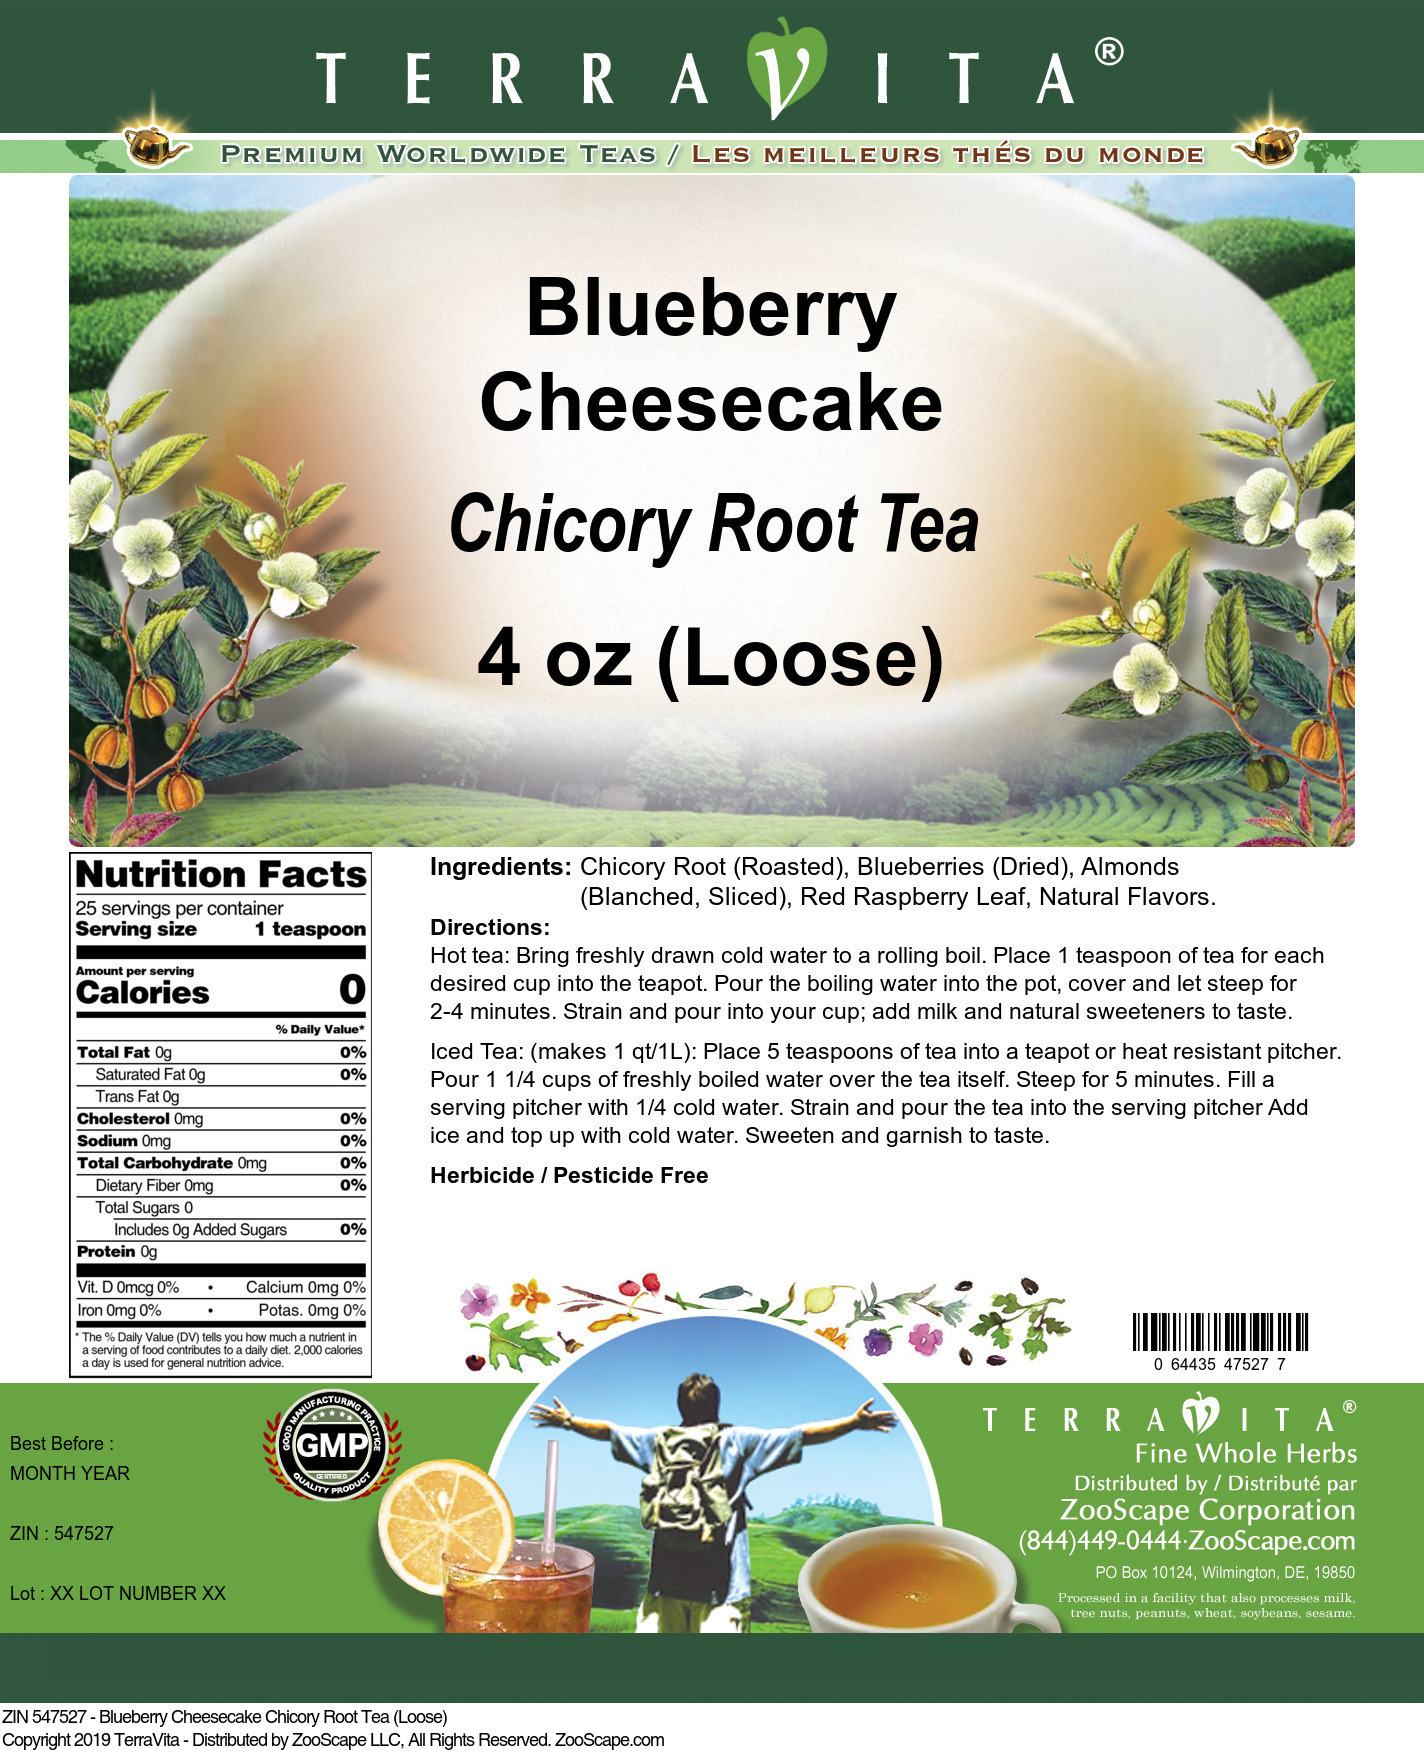 Blueberry Cheesecake Chicory Root Tea (Loose) - Label